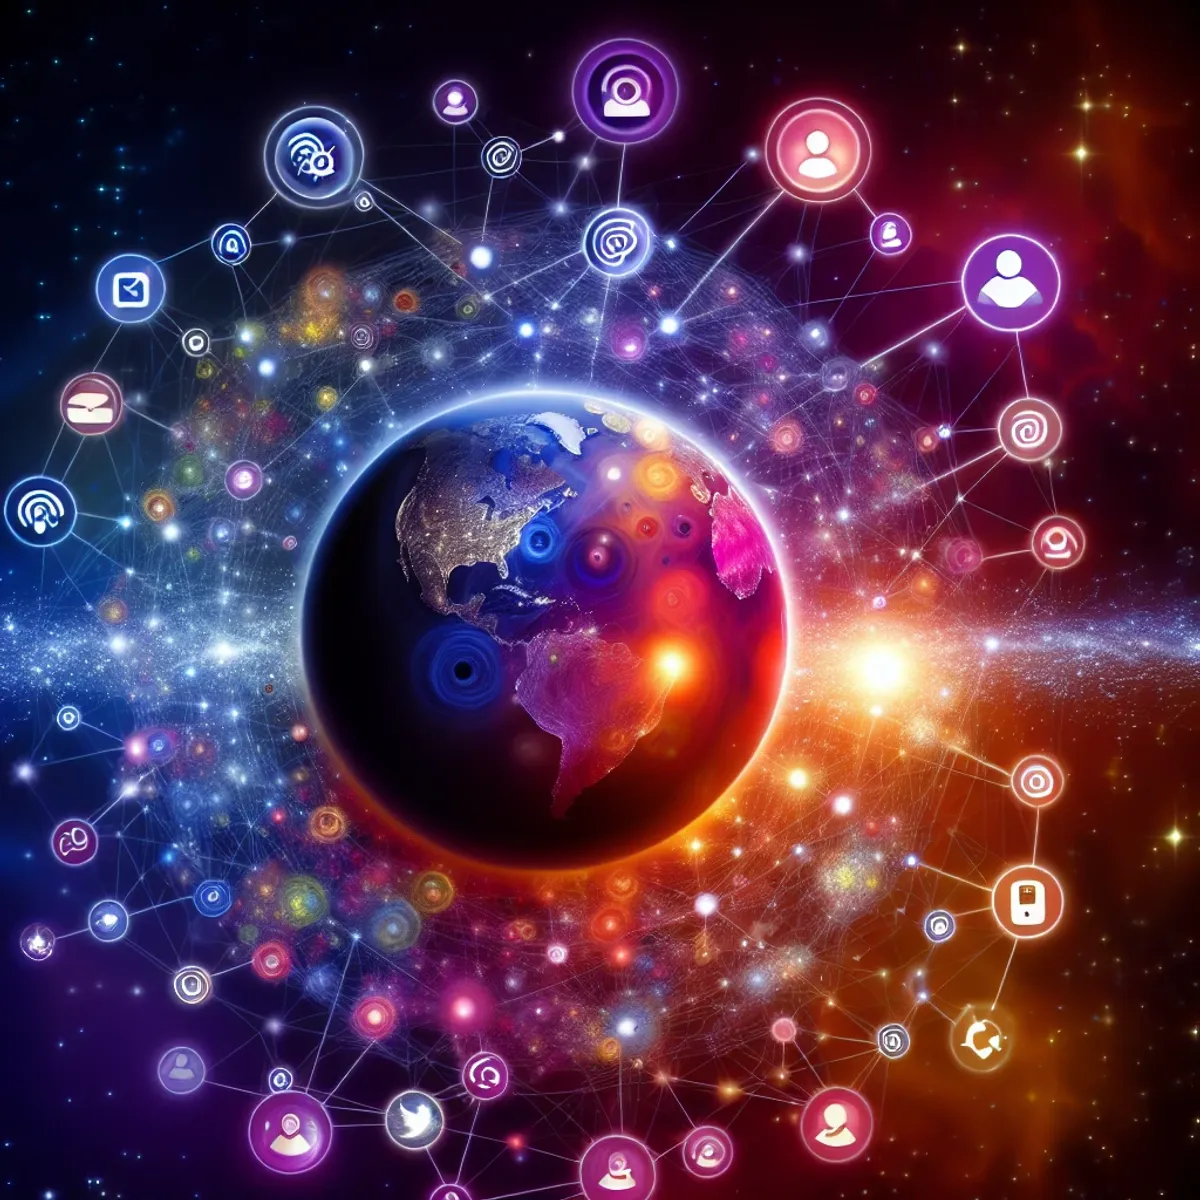 A digital galaxy with planets representing different social media platforms, connected by streams of light.